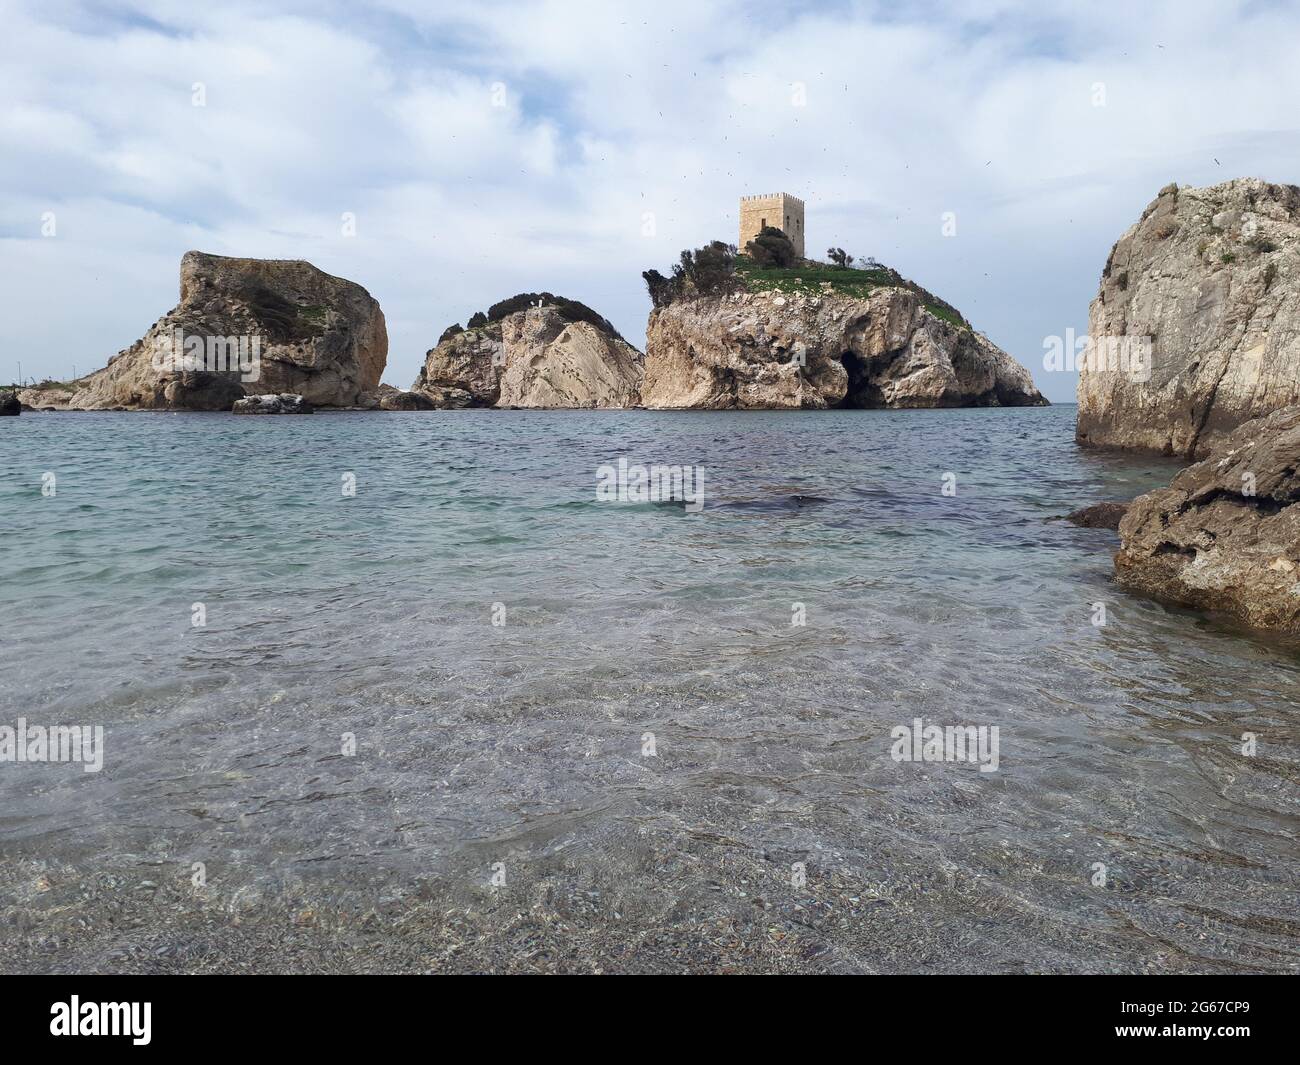 Sile castle on big rocks and tranquil sea Stock Photo